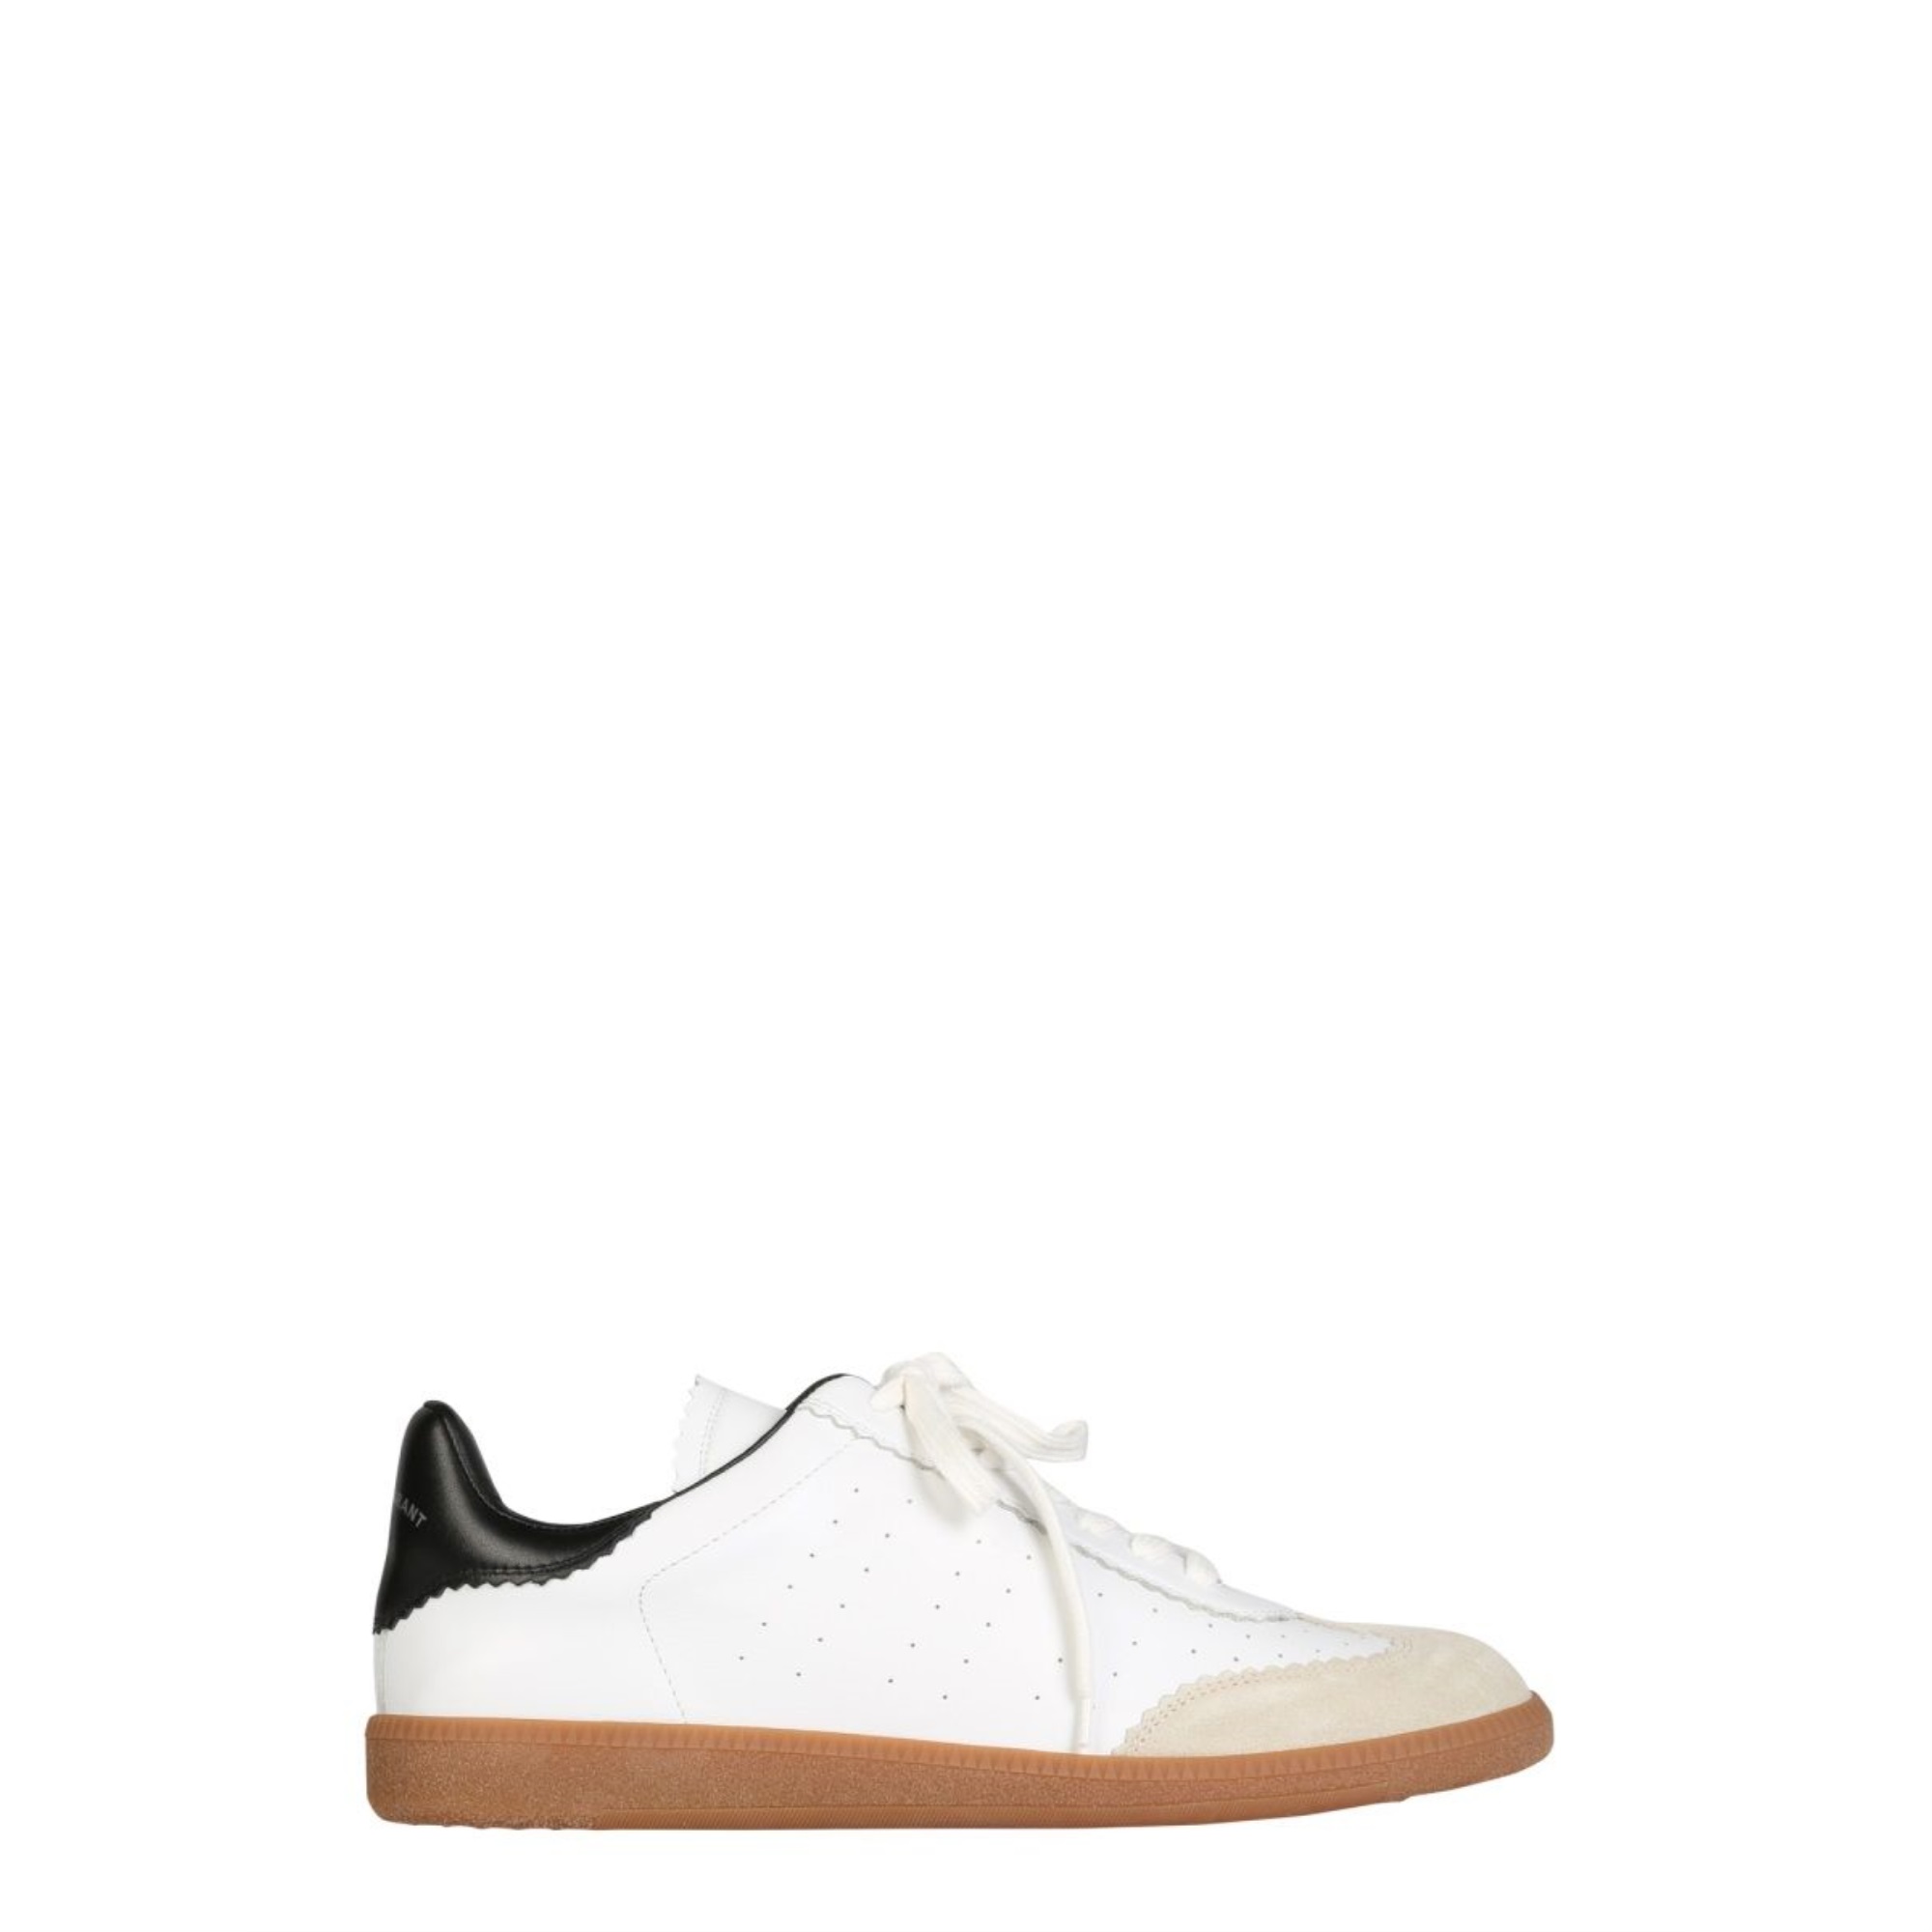 Isabel Marant Men'S Bk004700M001N20Wh White Other Materials Sneakers